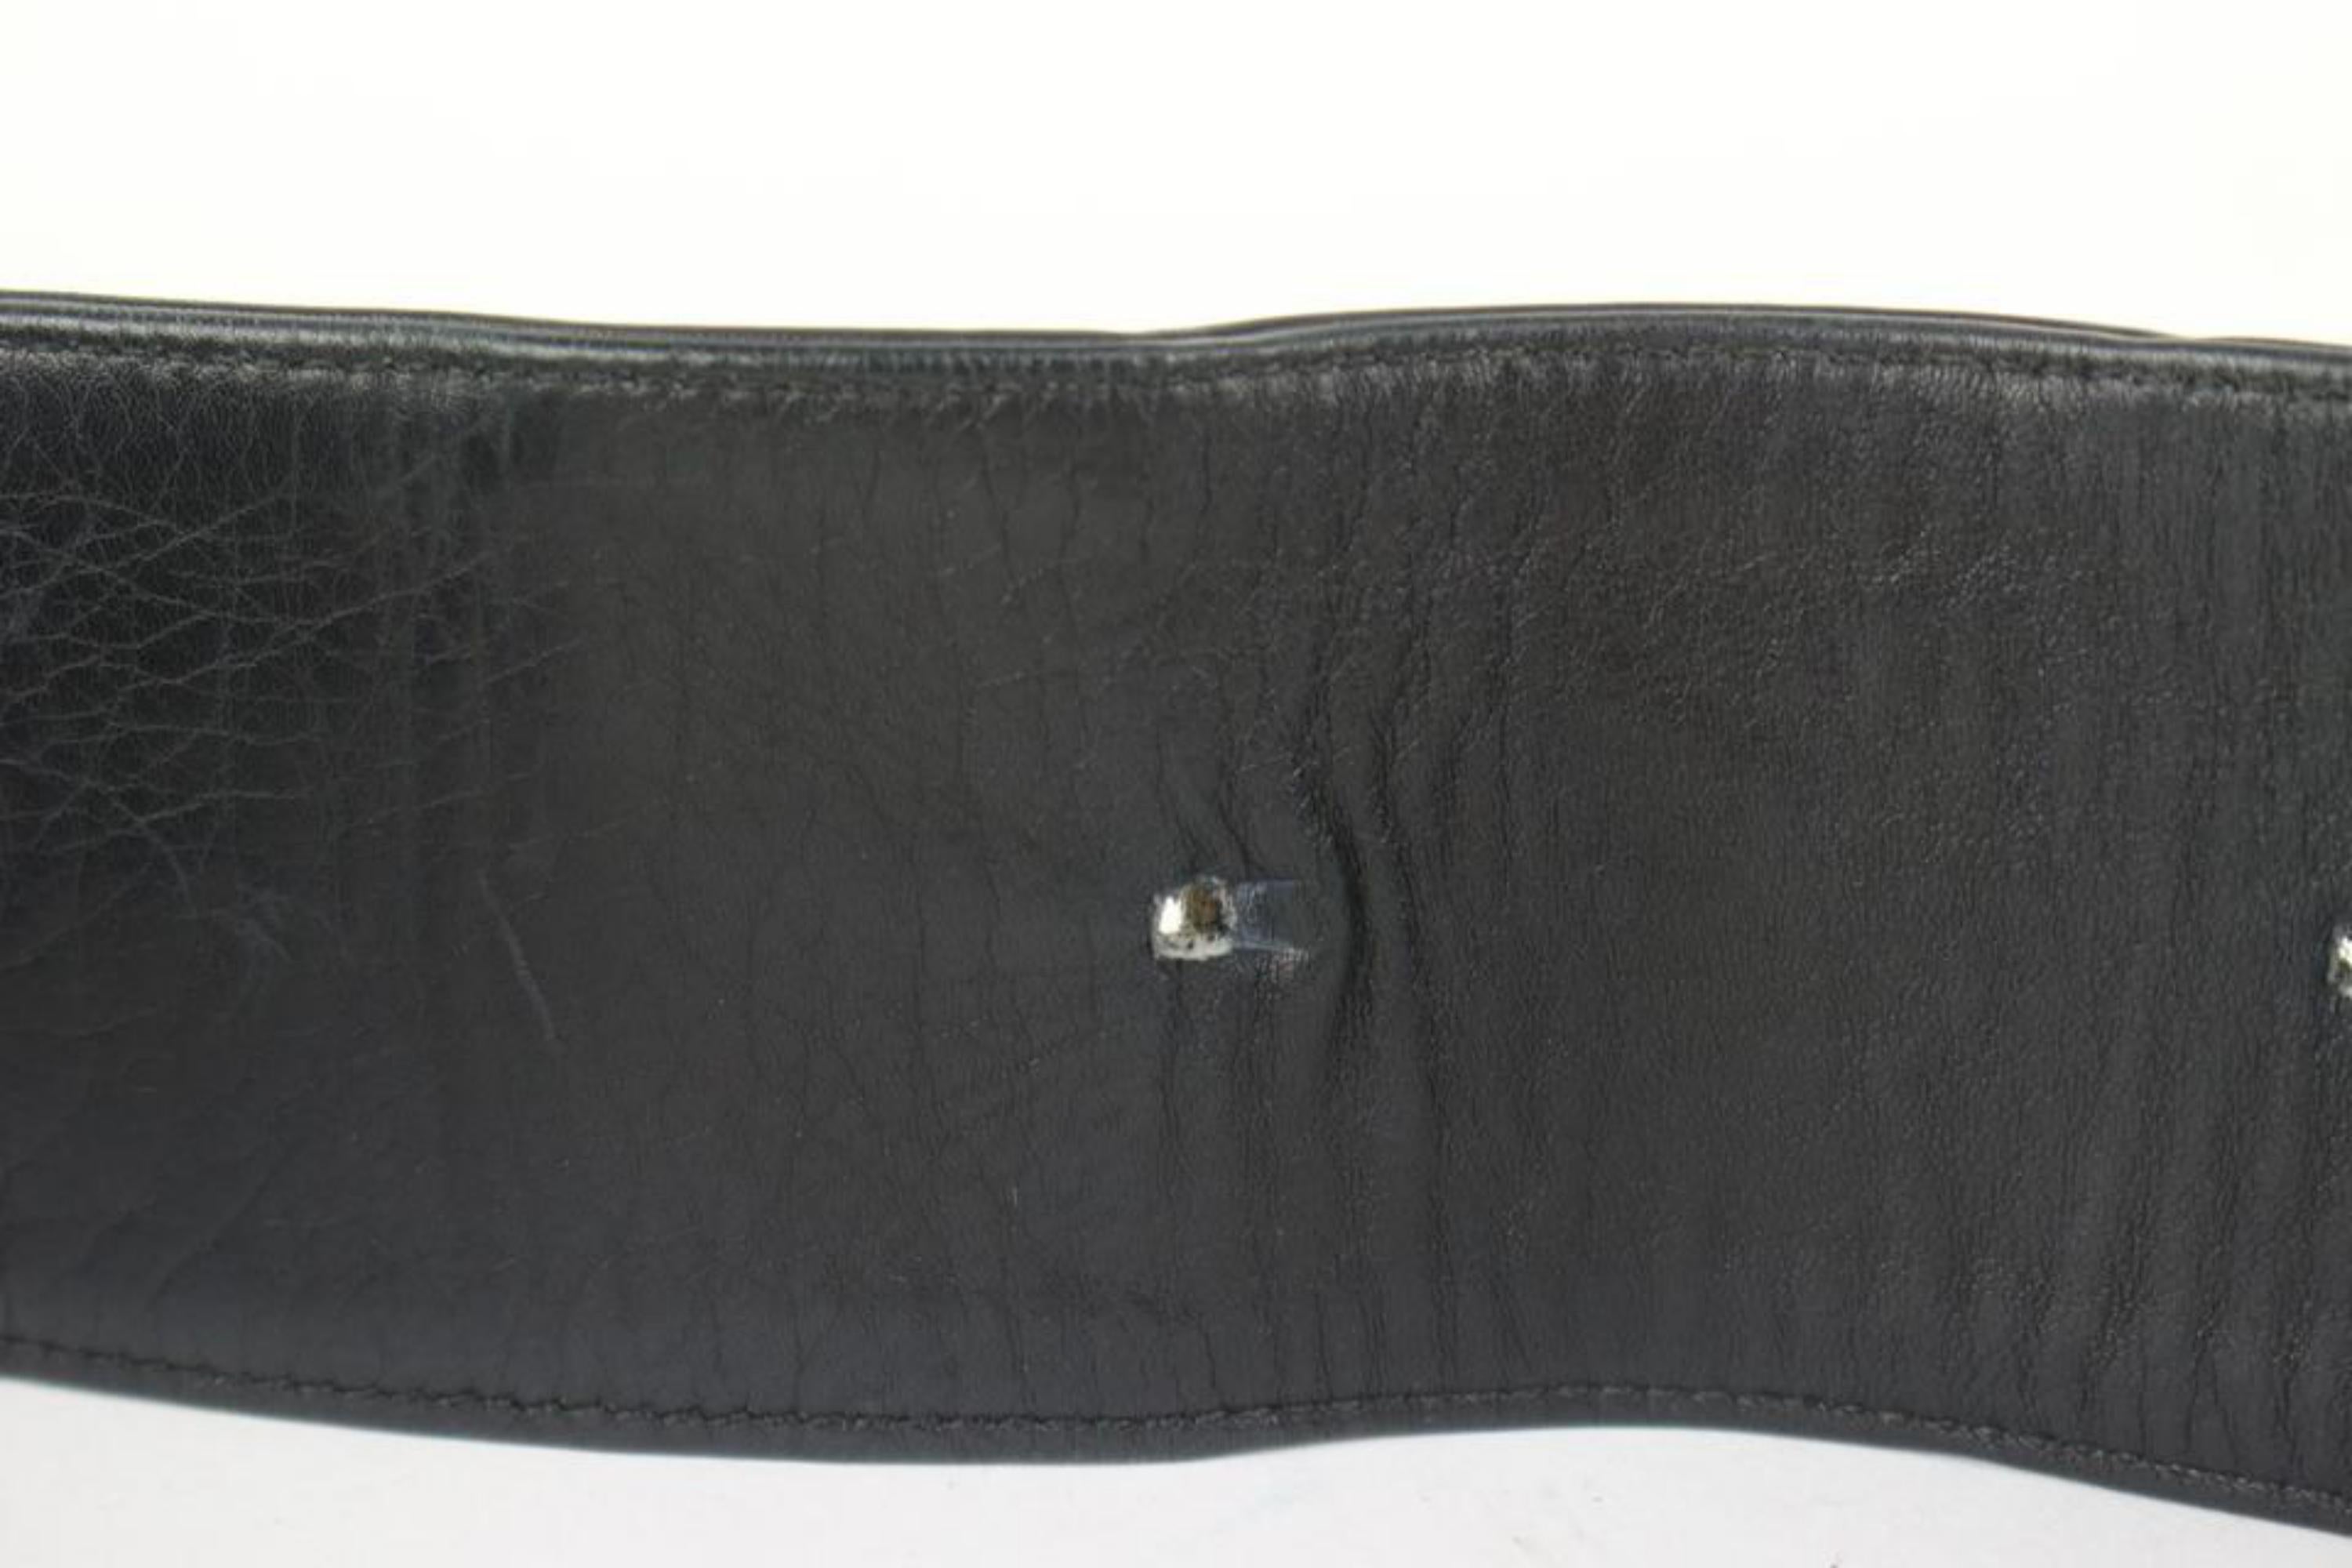 Chanel 80/32 Black Quilted Lambskin Belt 107c46 In Fair Condition For Sale In Dix hills, NY